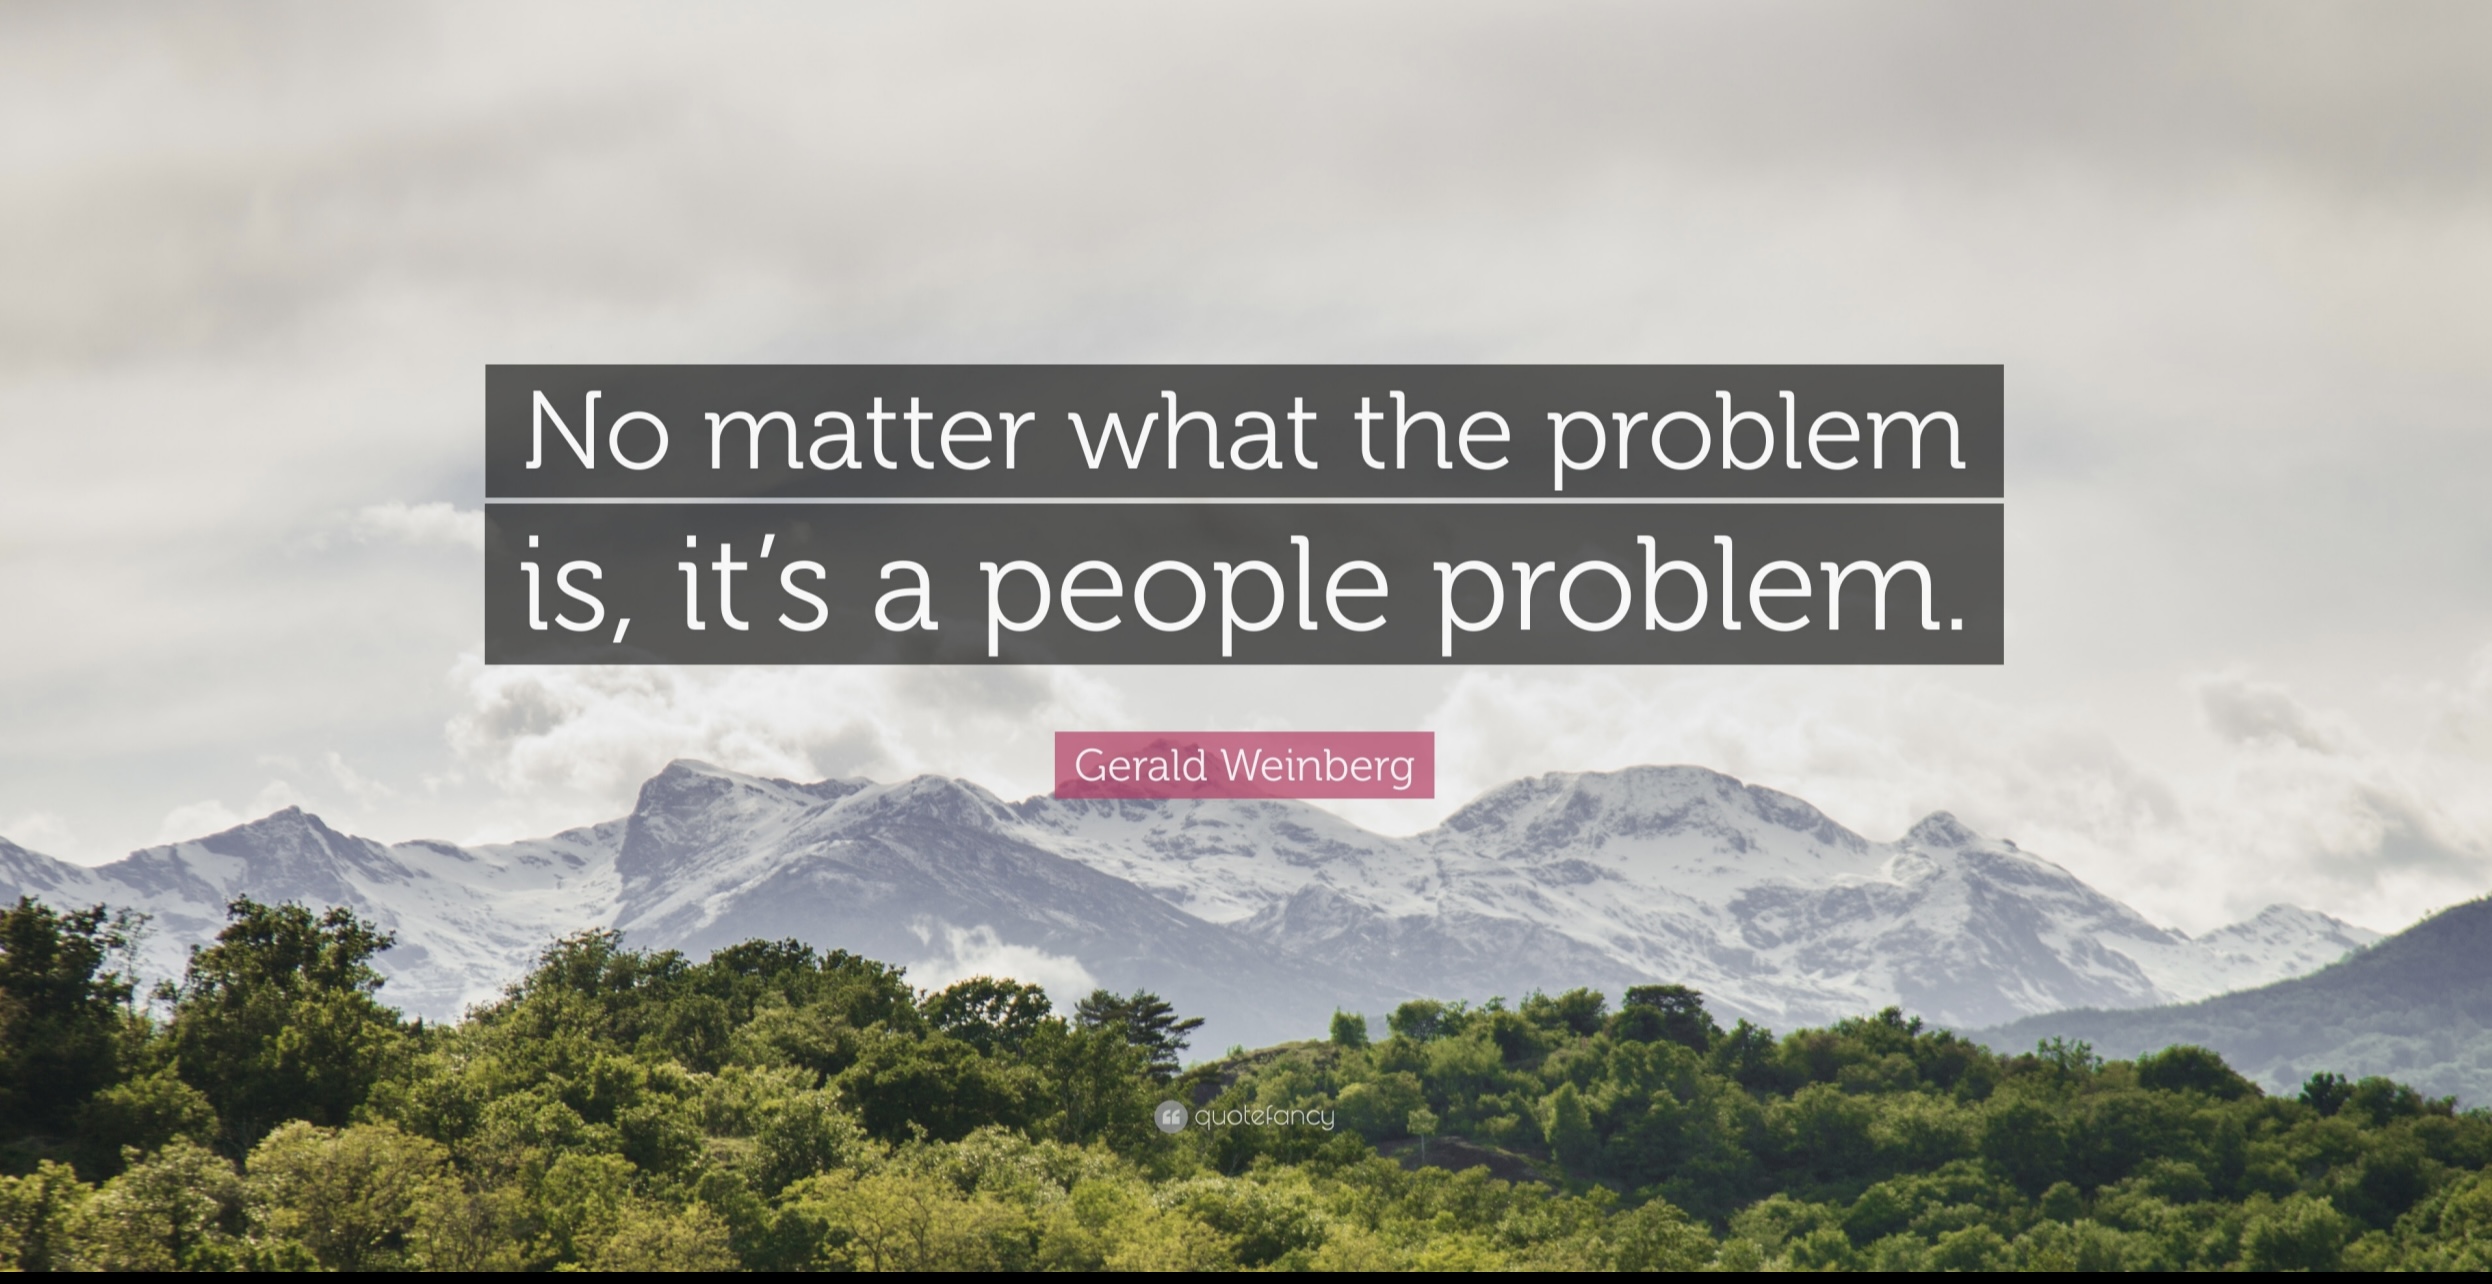 No matter what the problem is, it’s a people problem. — Gerald Weinberg